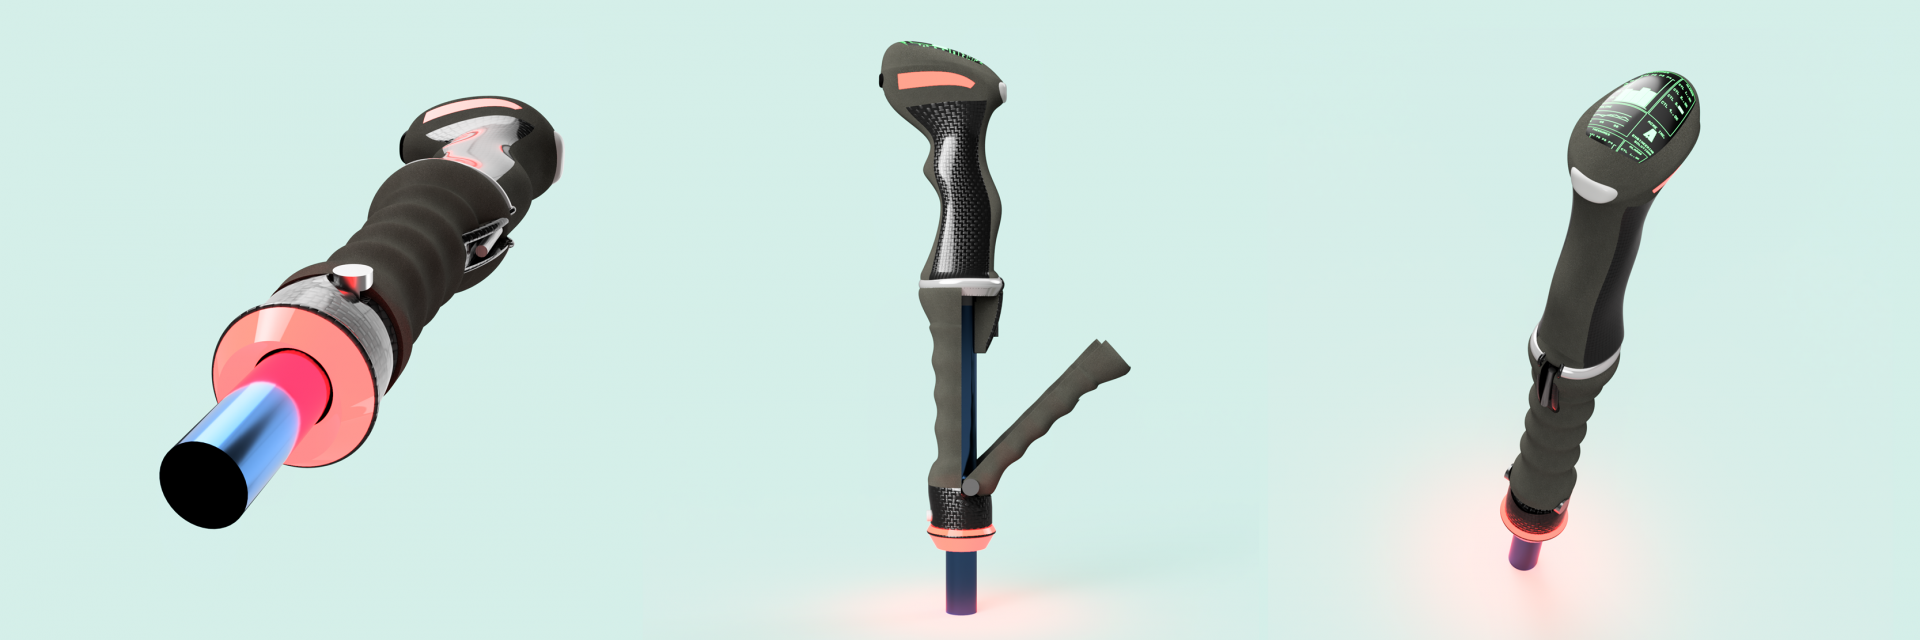 Several renders of a club-like walking stick. 